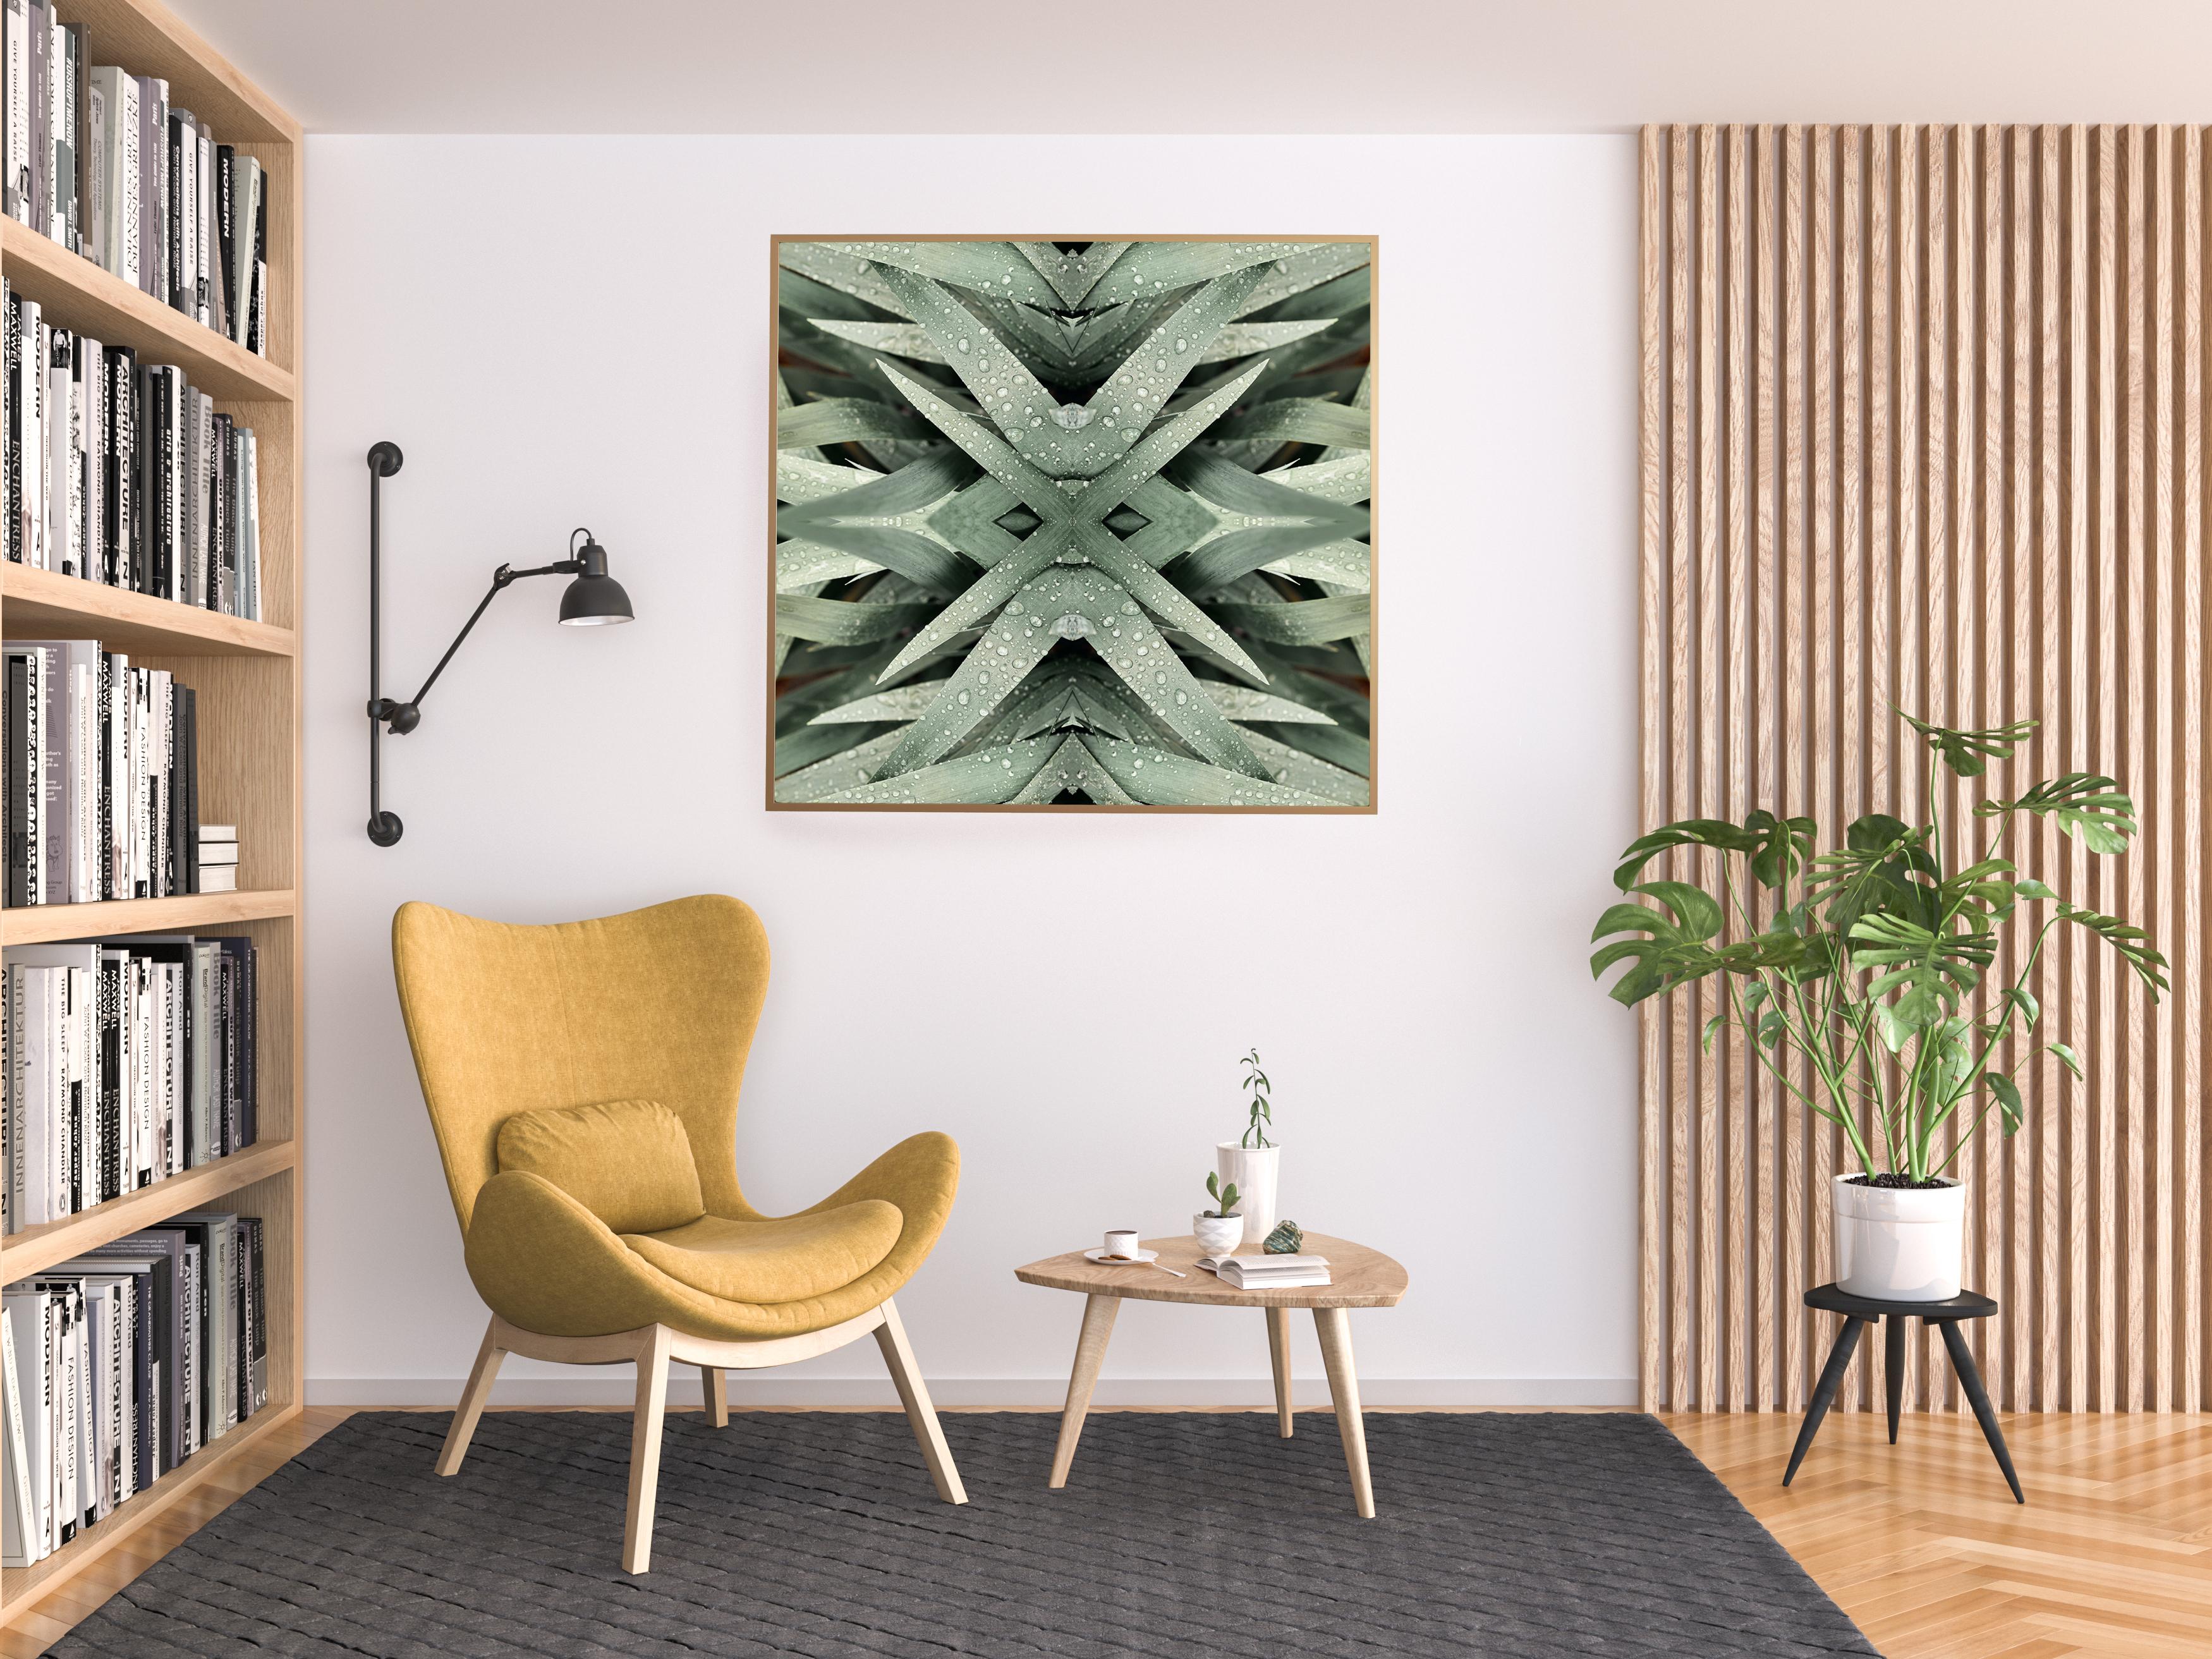 This print features the playful relationship between natural forms and botanicals. In this image Erin uses the natural composition of the dramatic green leaves, and her own collage work, to create a hypnotic mandala with the floral. Some describe it